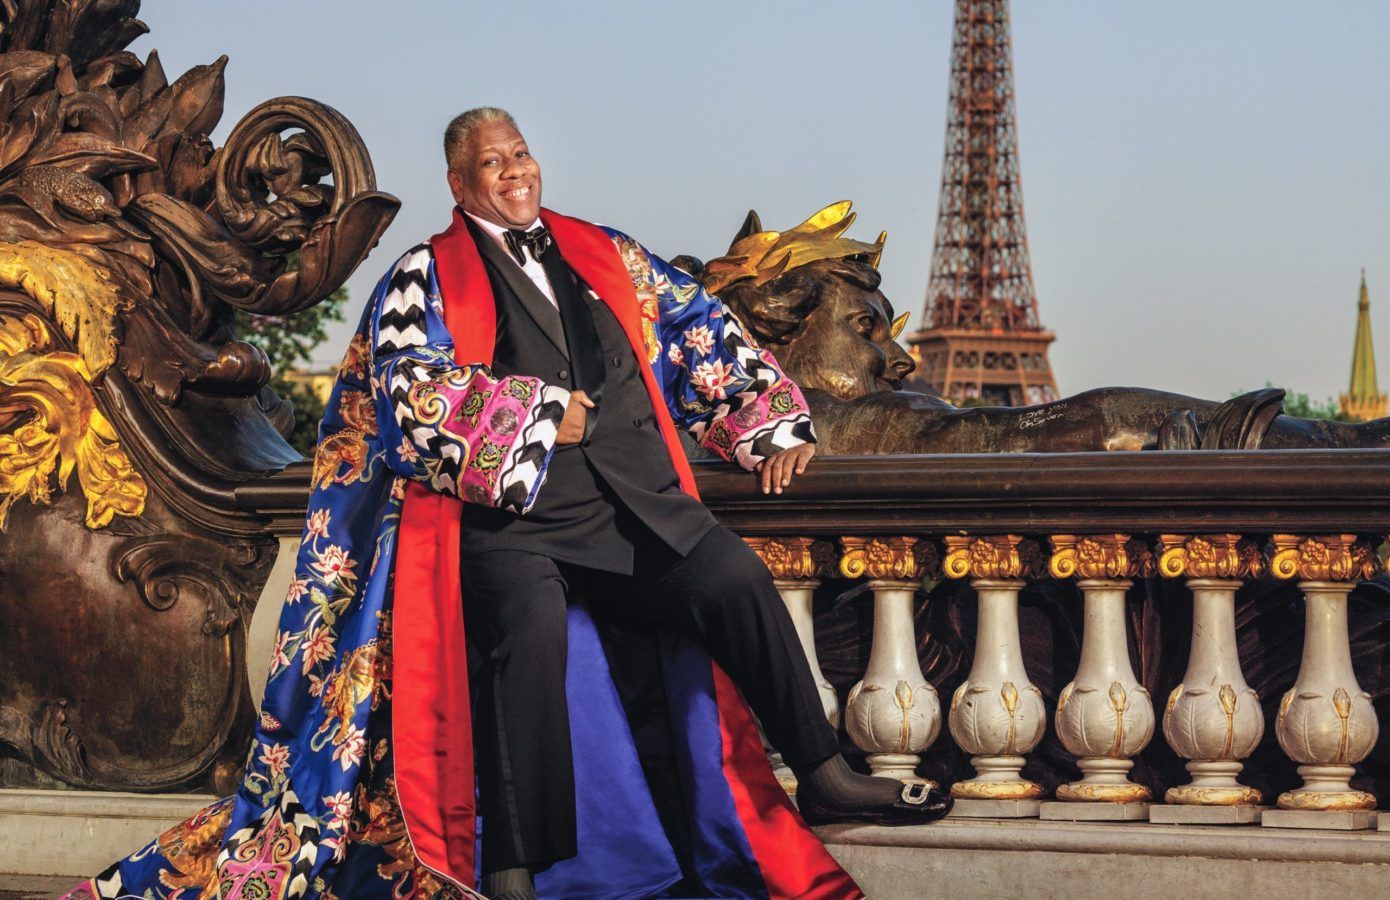 Fashion icon and creative André Leon Talley has passed away at the age of 73